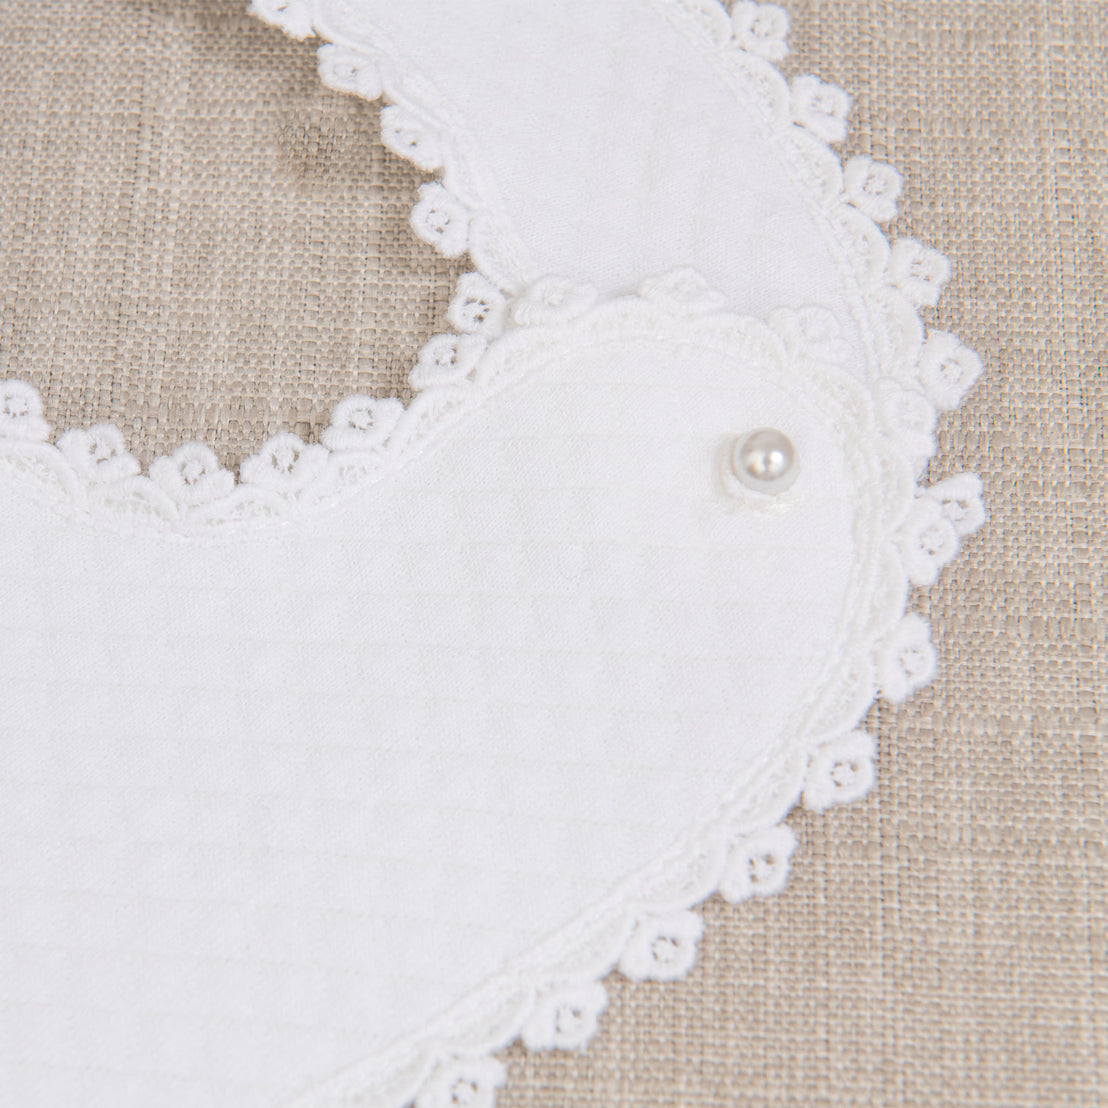 Close-up of the Mila Bib and its small pearl button enclosure on a beige fabric background